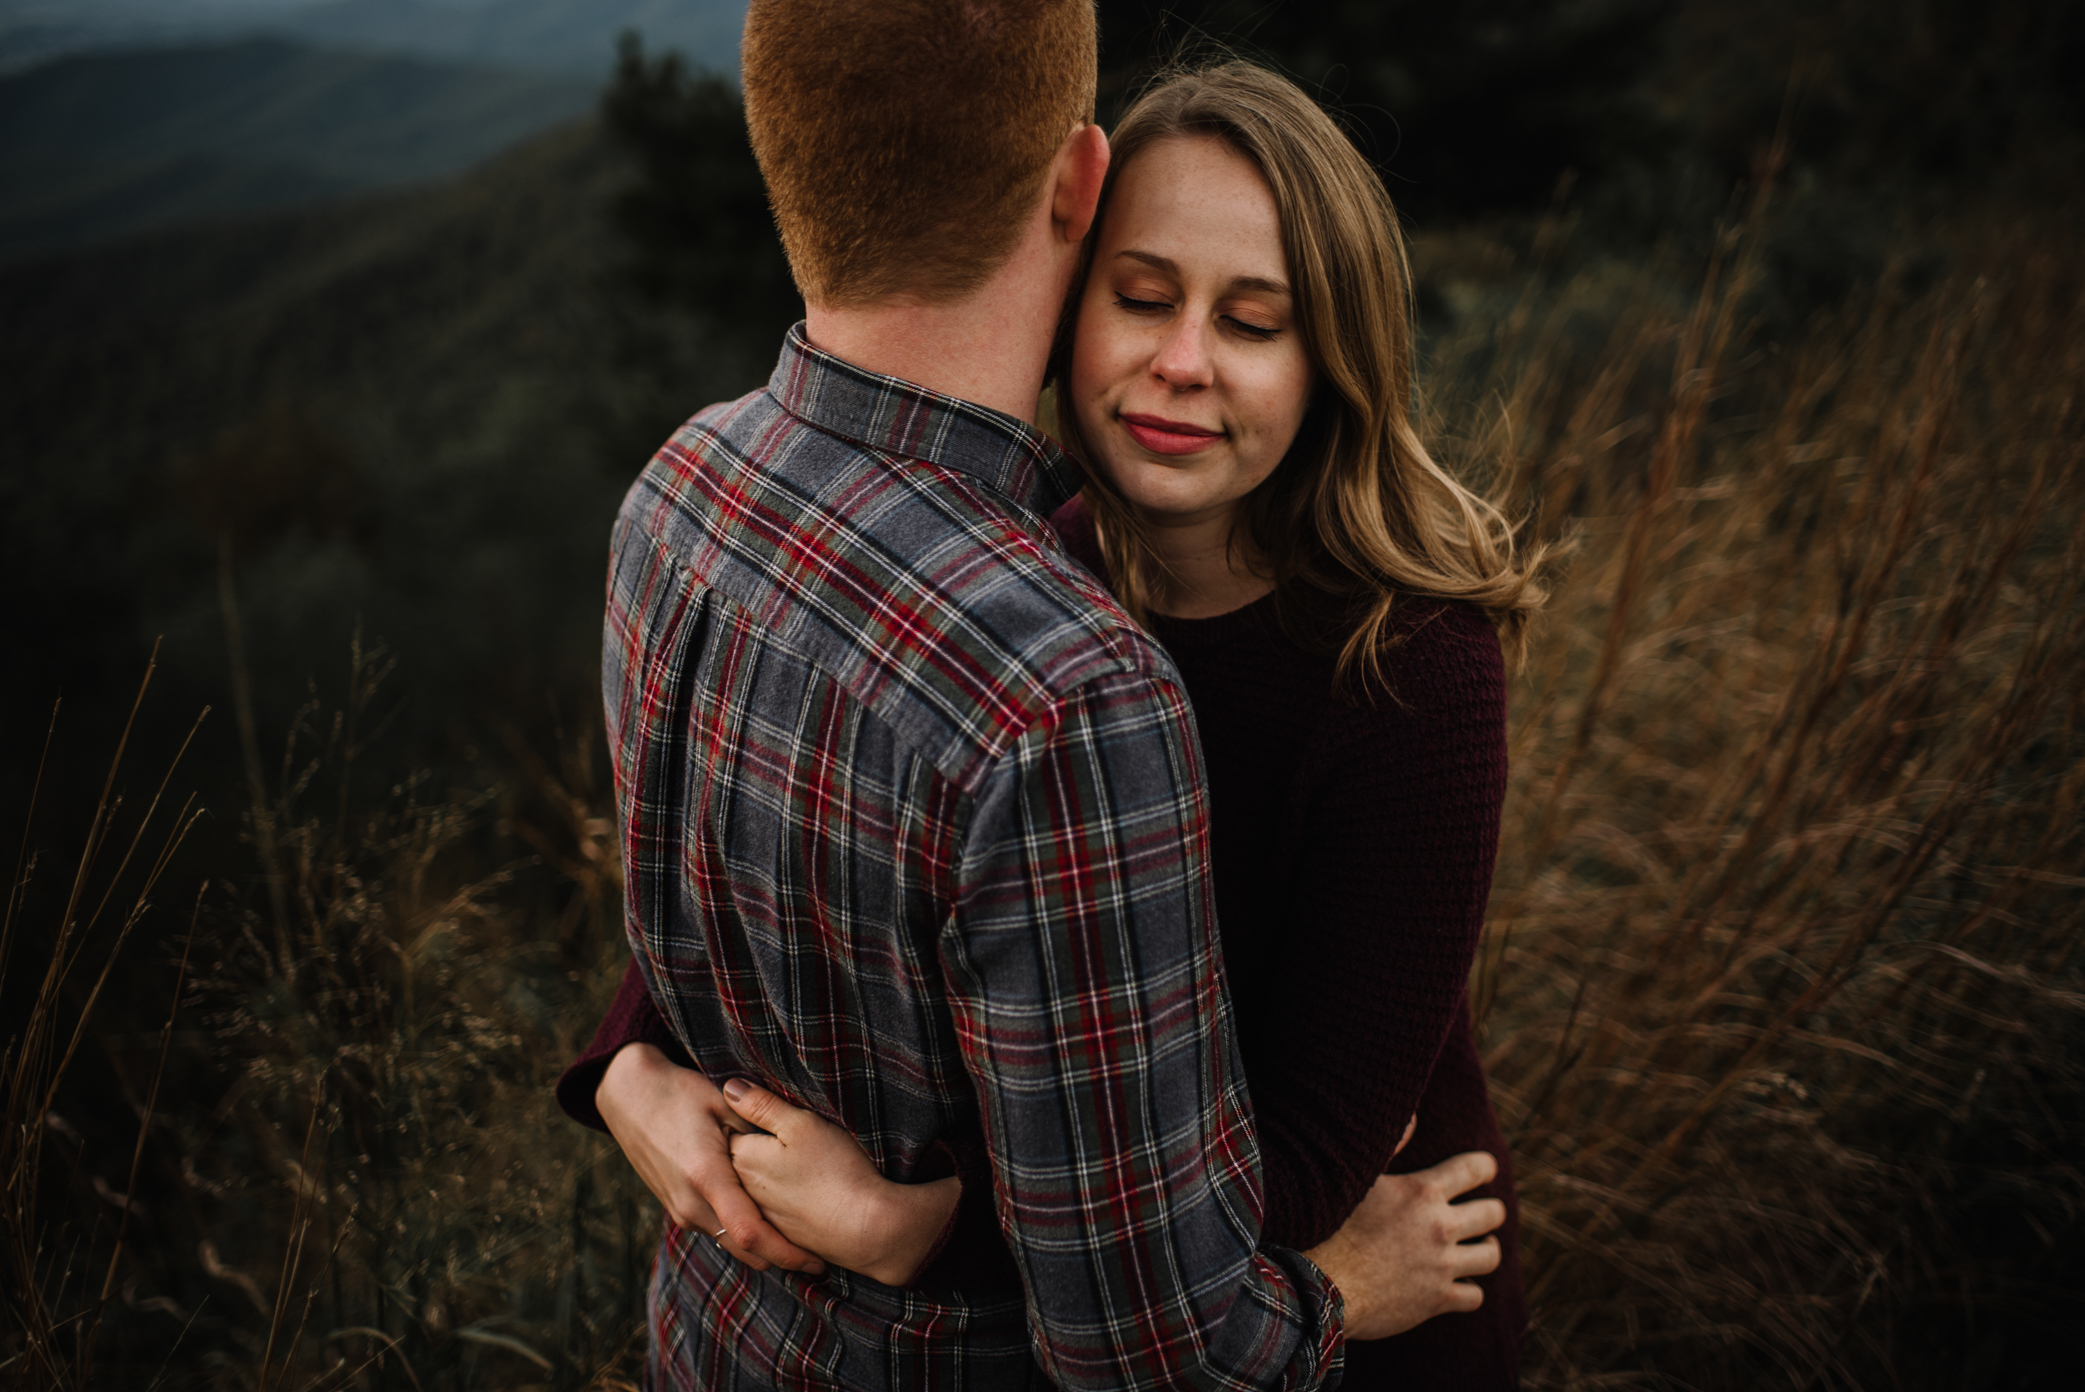 Molly and Zach Engagement Session - Fall Autumn Sunset Couple Adventure Session - Shenandoah National Park - Blue Ridge Parkway Skyline Drive - White Sails Creative_41.JPG